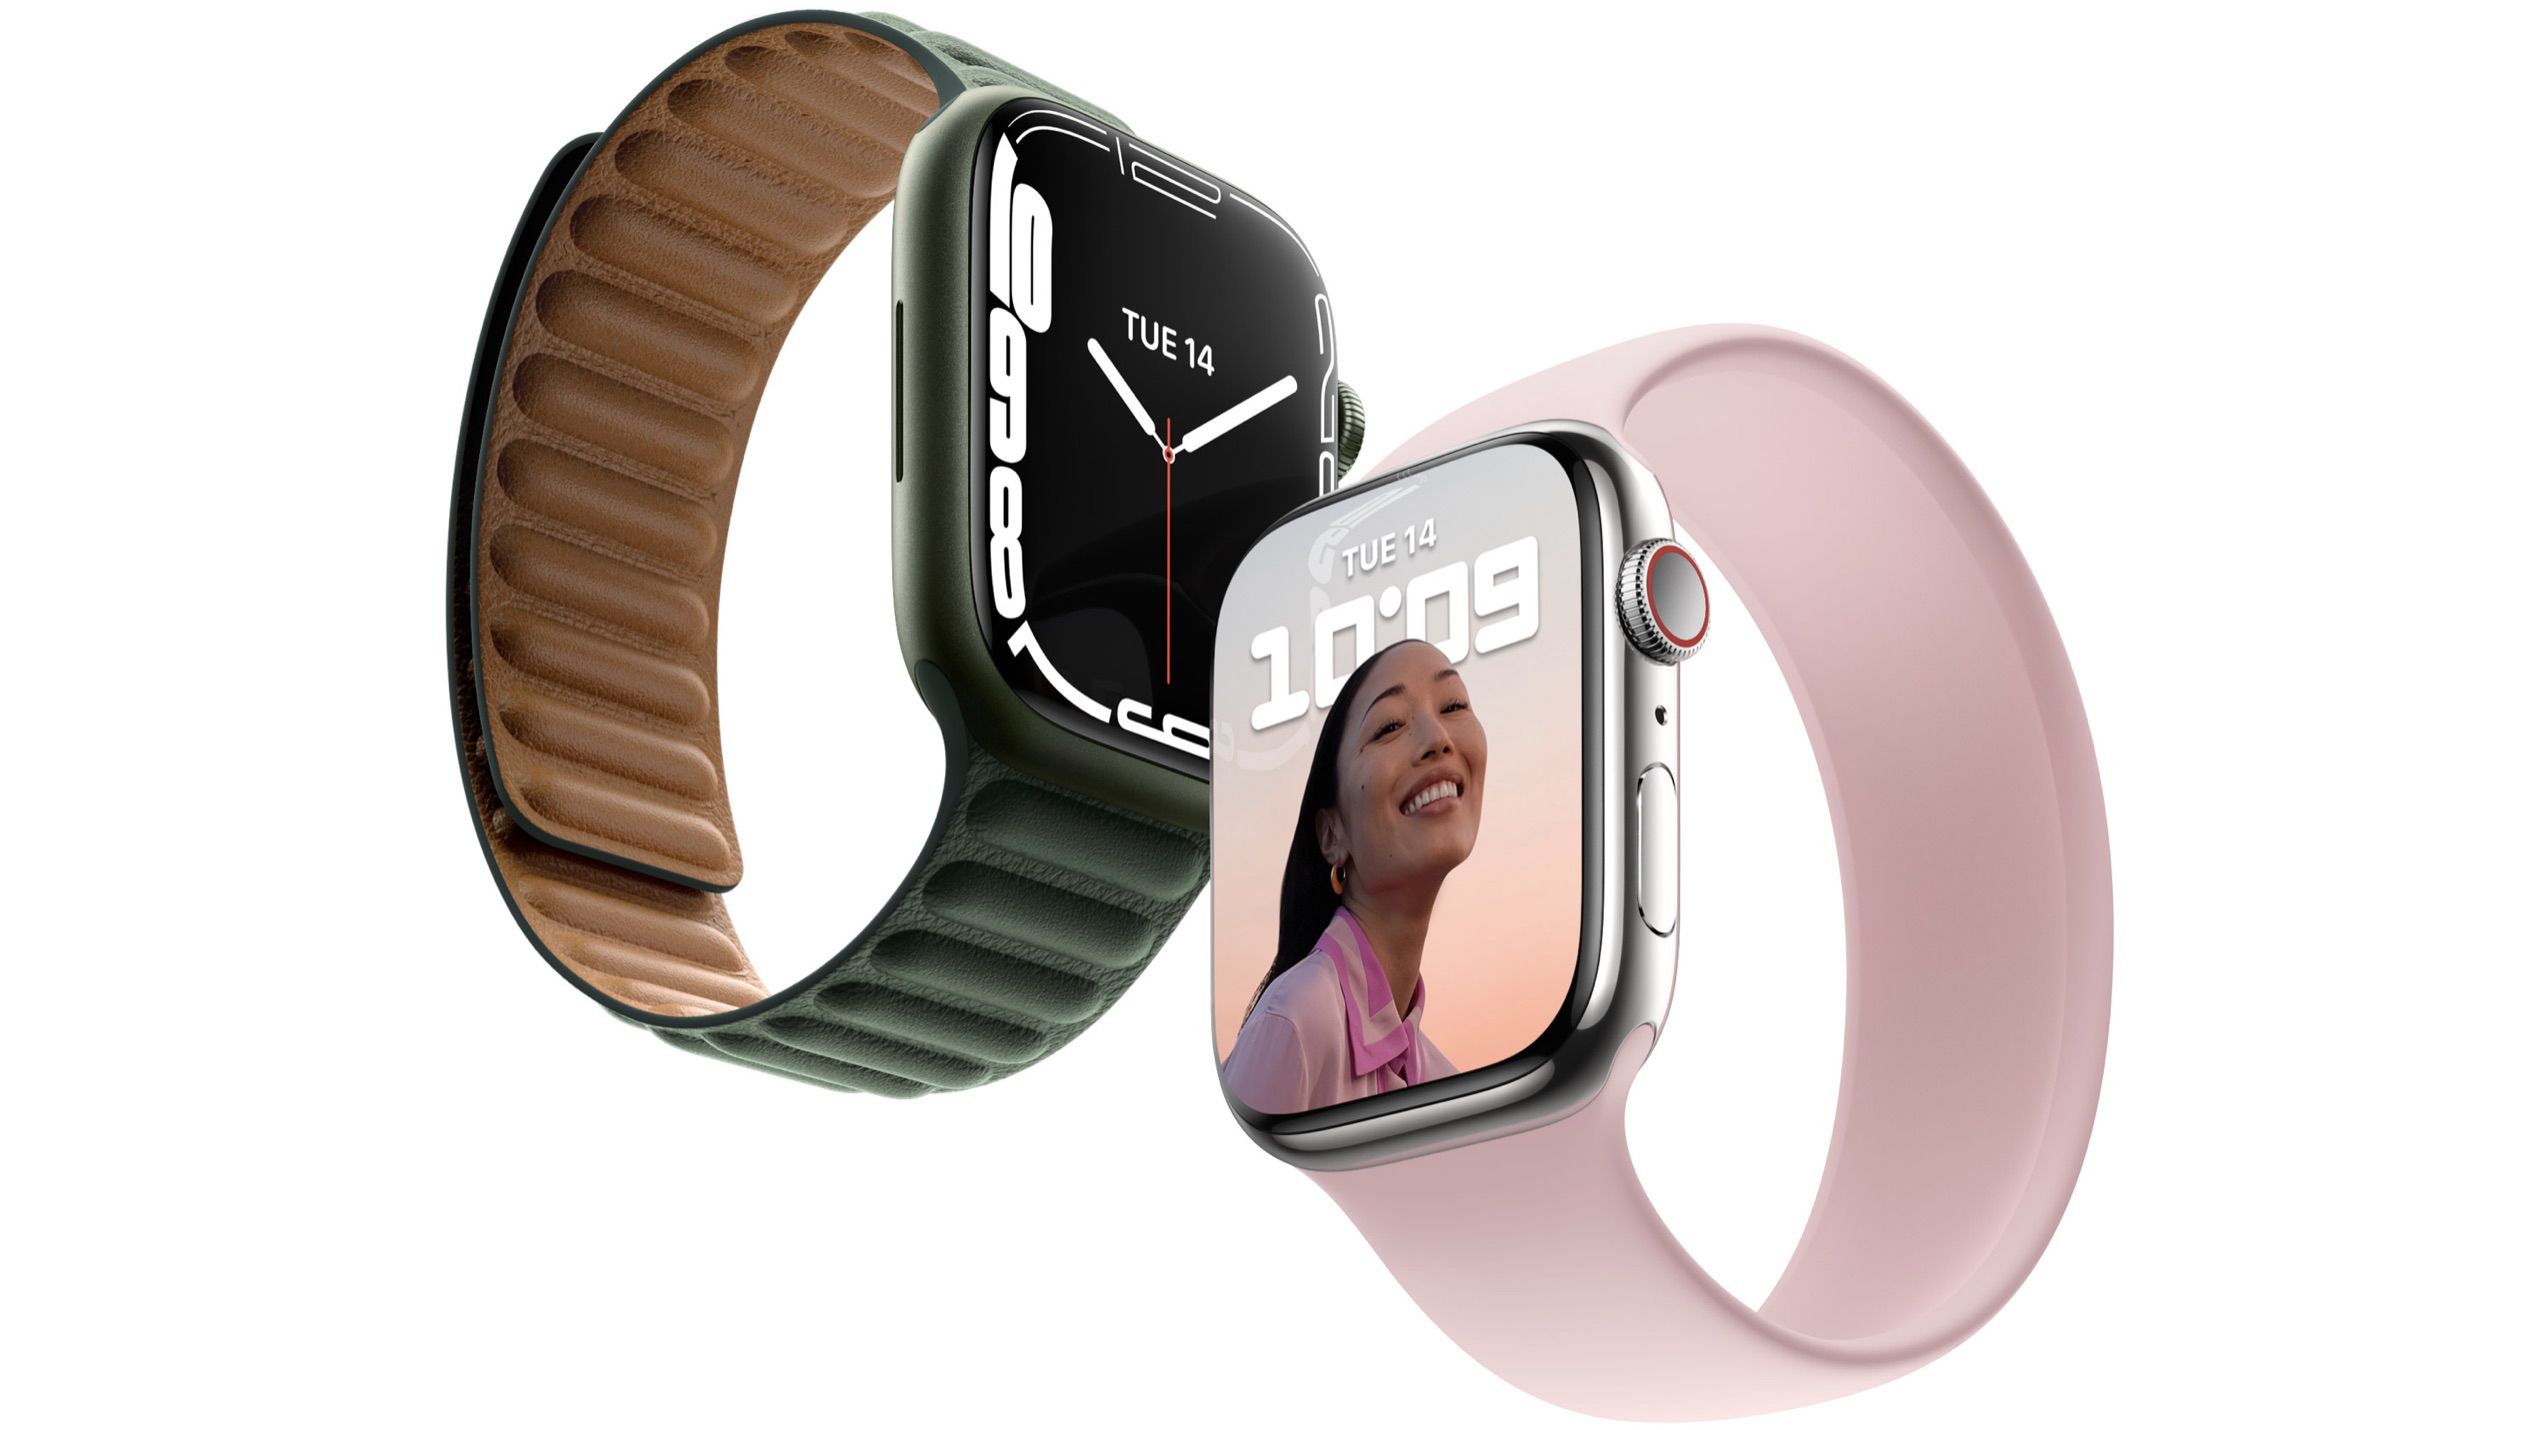 Apple Watch Series 7 to Come in 41mm and 45mm Case Sizes, Will Be Compatible With Older Bands - MacRumors